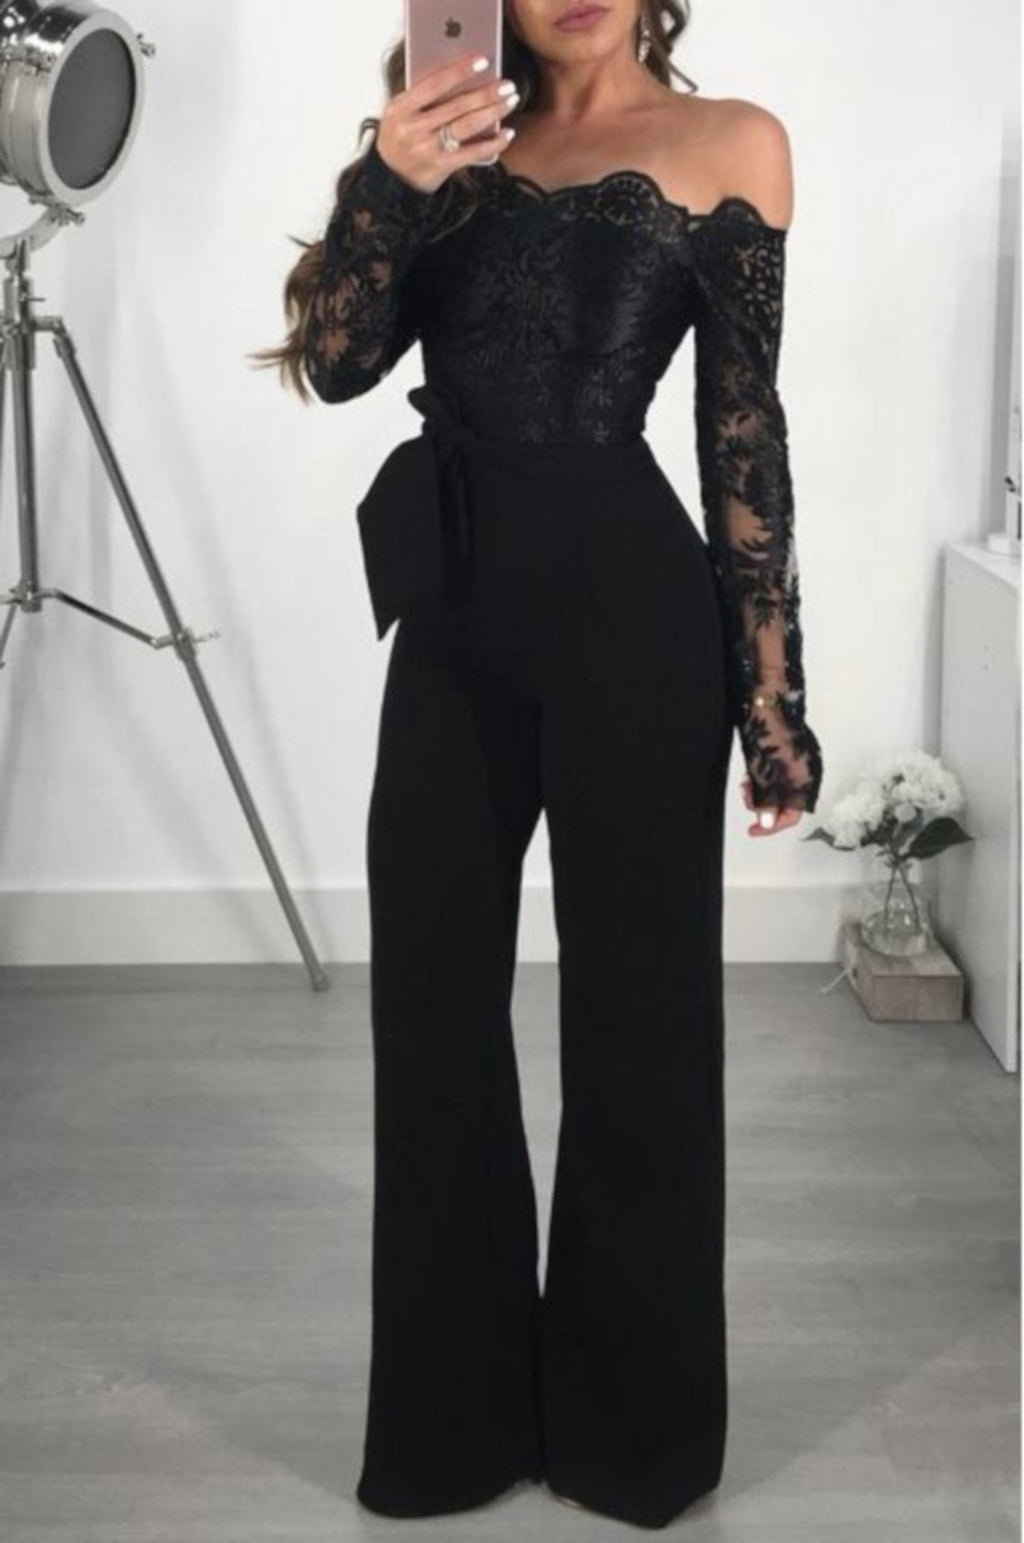 Jumpsuit Rompers | Ladies Sexy Business Suits - Edgy Couture